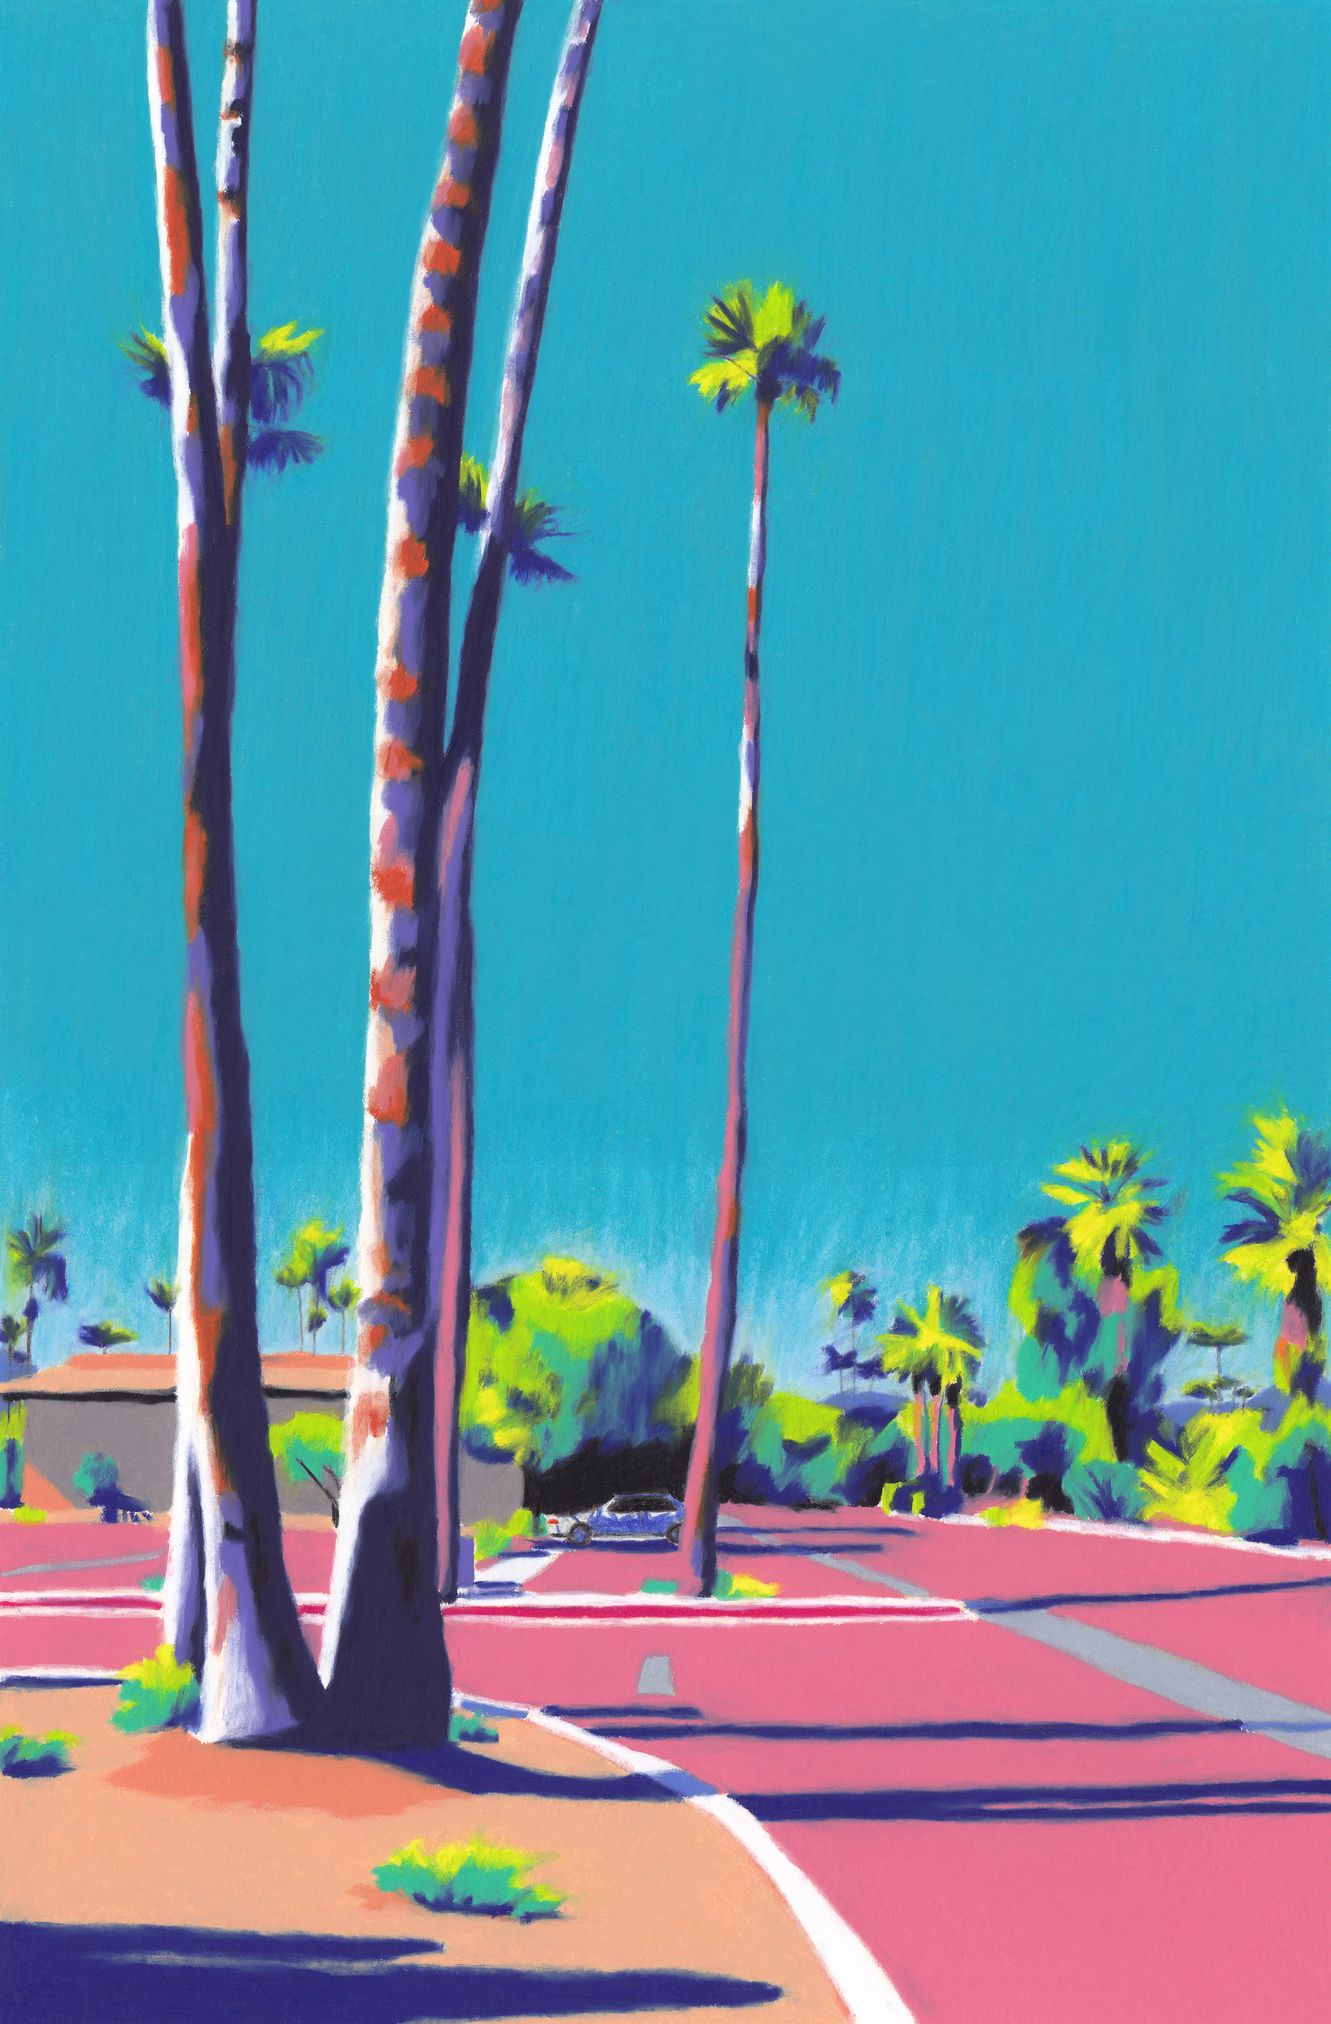 garance-illustration-Clement-Thoby-PERSONAL_WORK_Palm_Springs_Parking_Lot